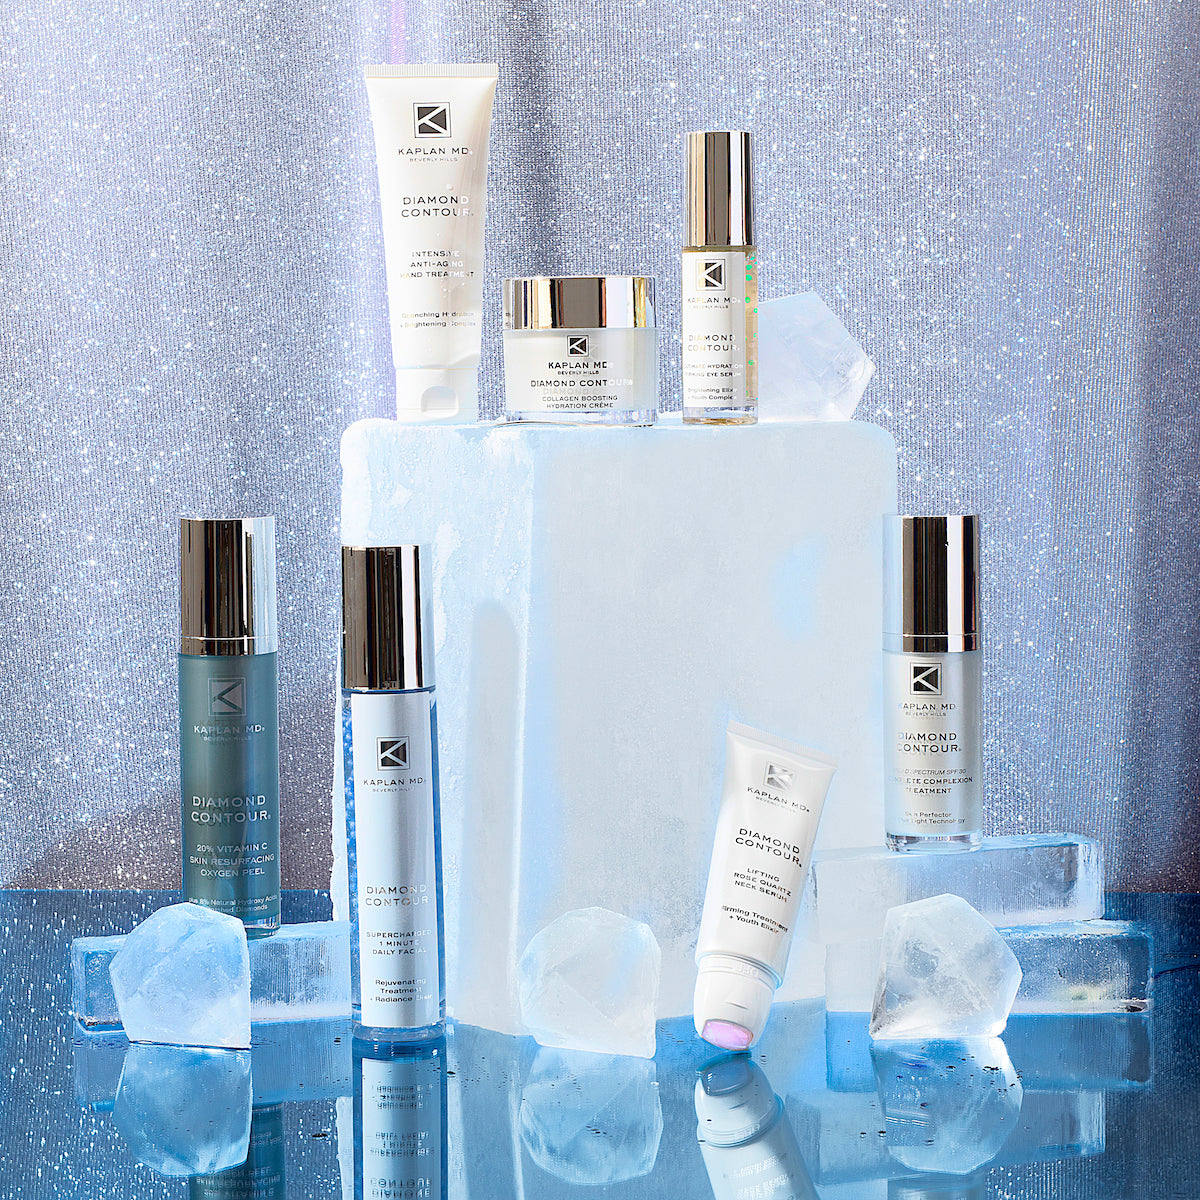 A luxurious, limited-edition Diamond Contour bundle that houses powerhouse formulas that leave skin feeling smooth, youthful, radiant and healthy.